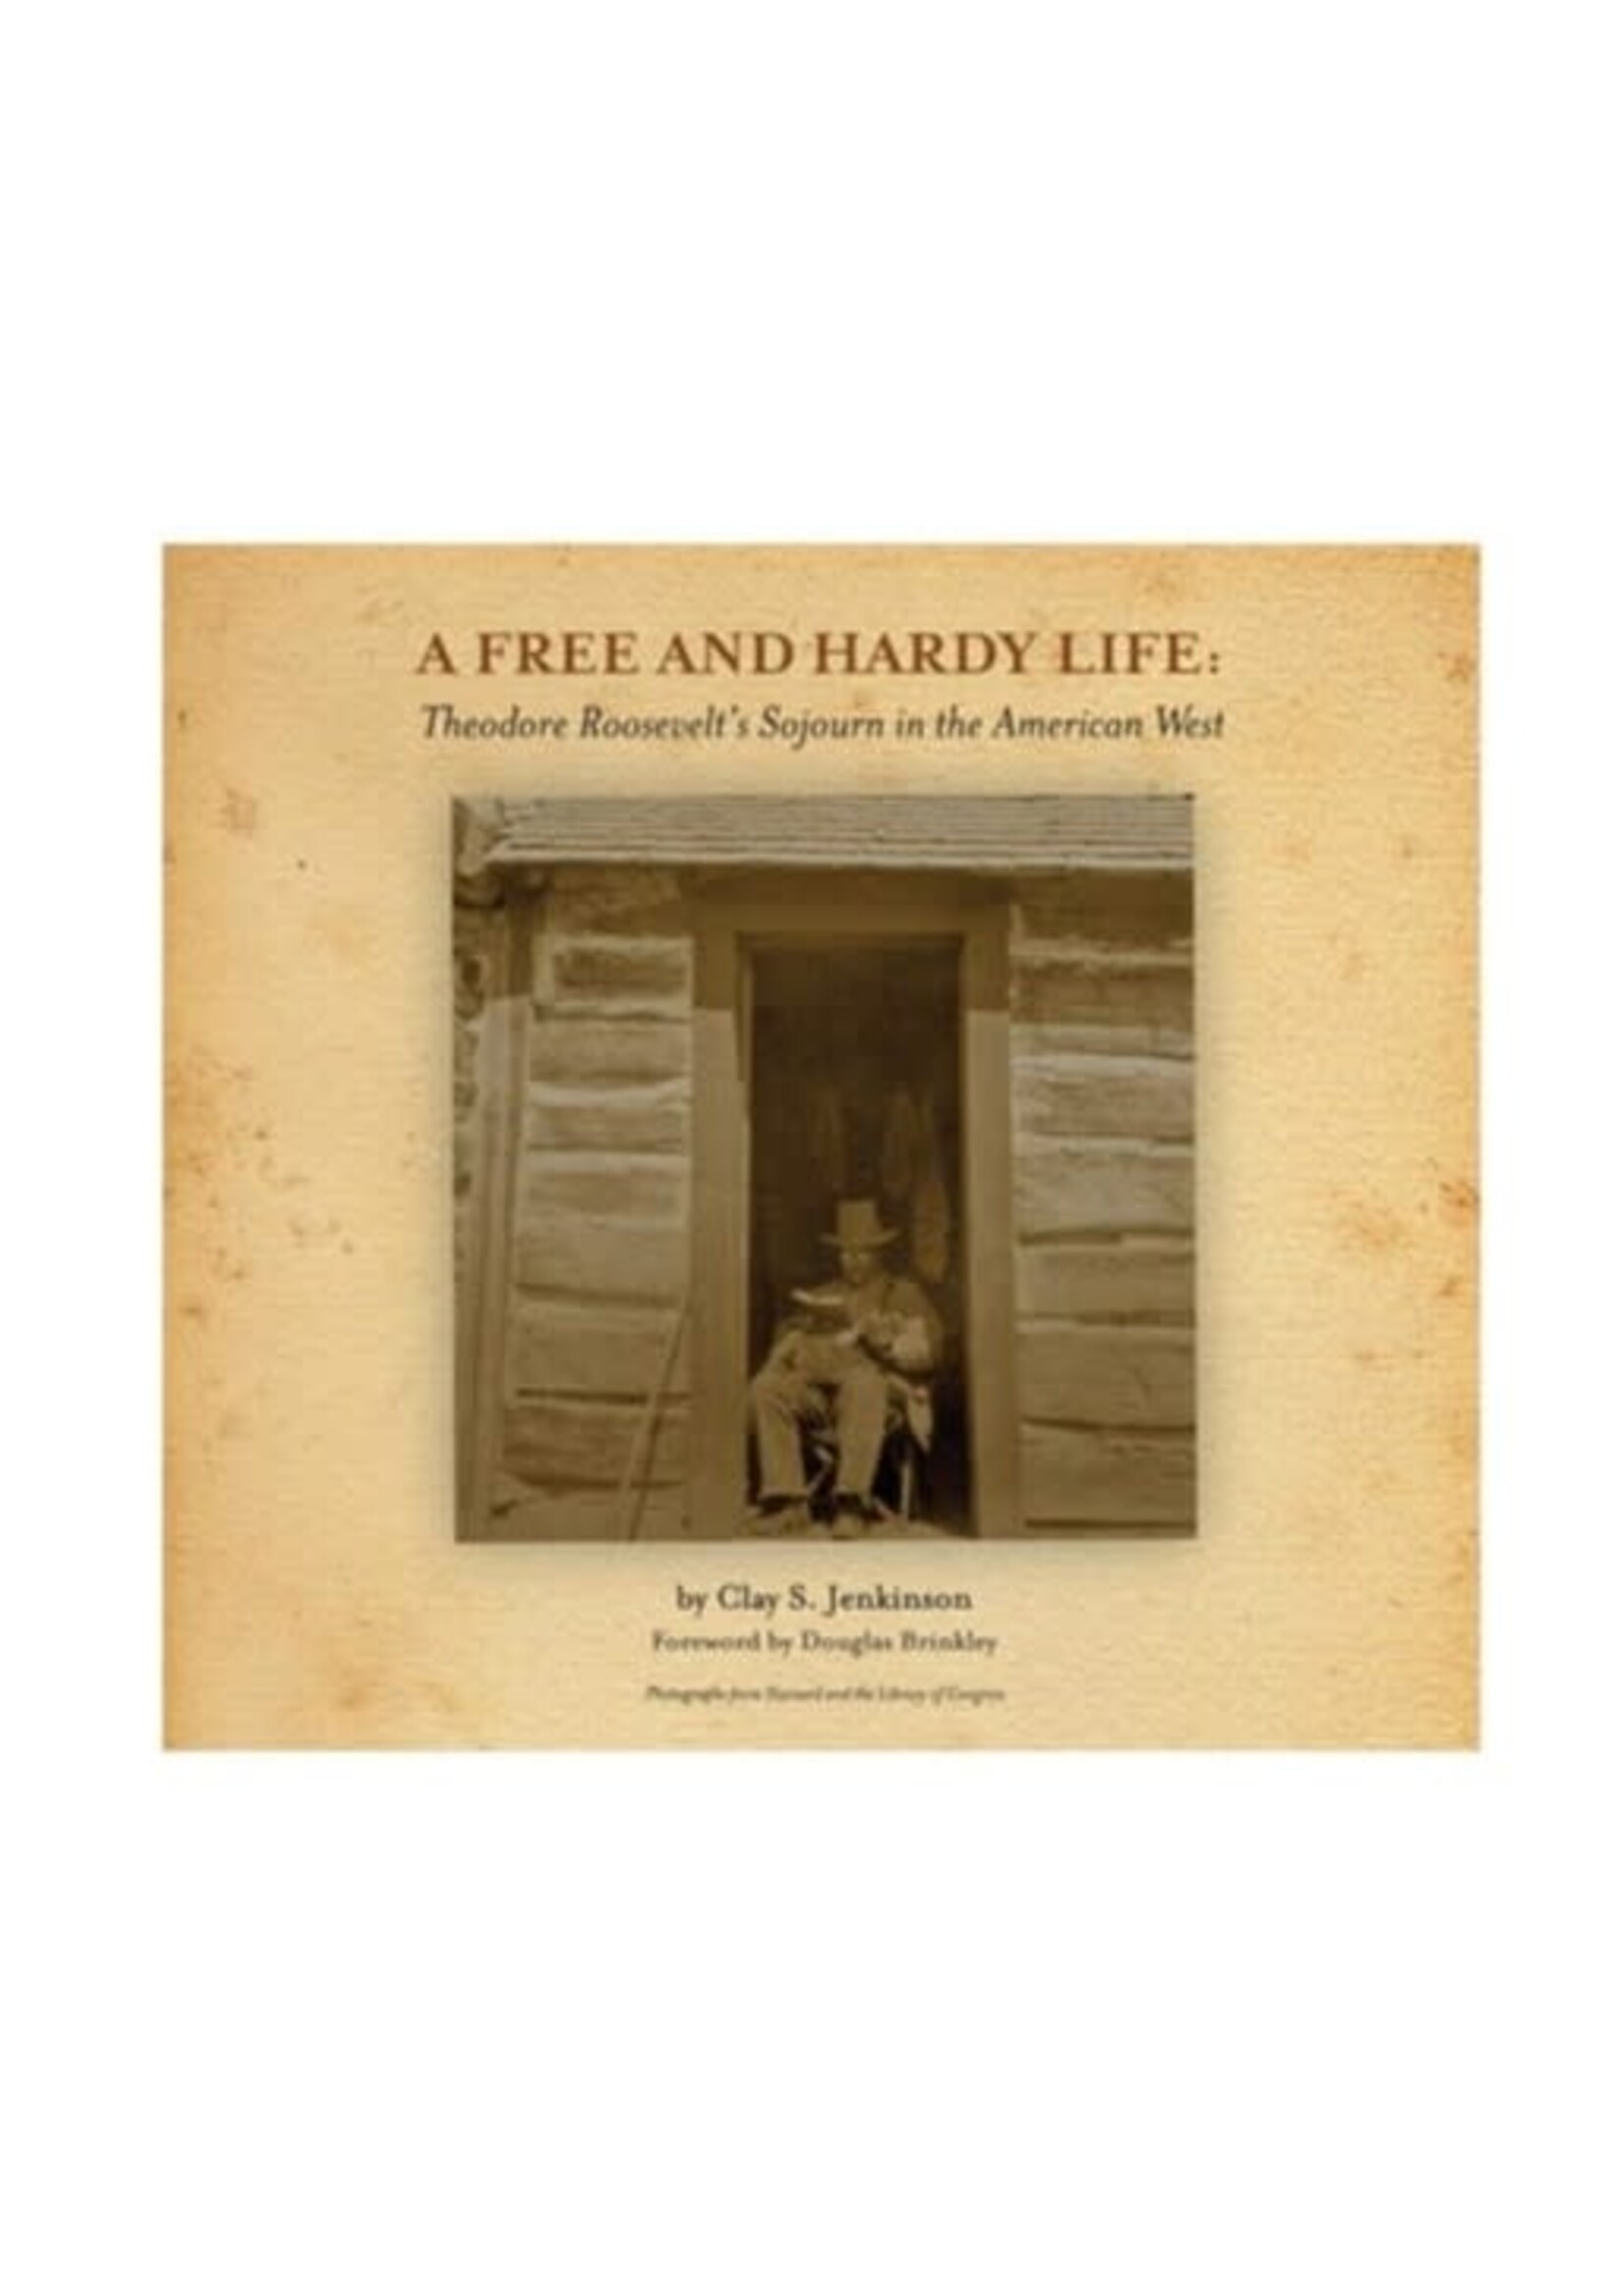 A Free and Hardy Life: Theodore Roosevelt's Sojourn in the American West